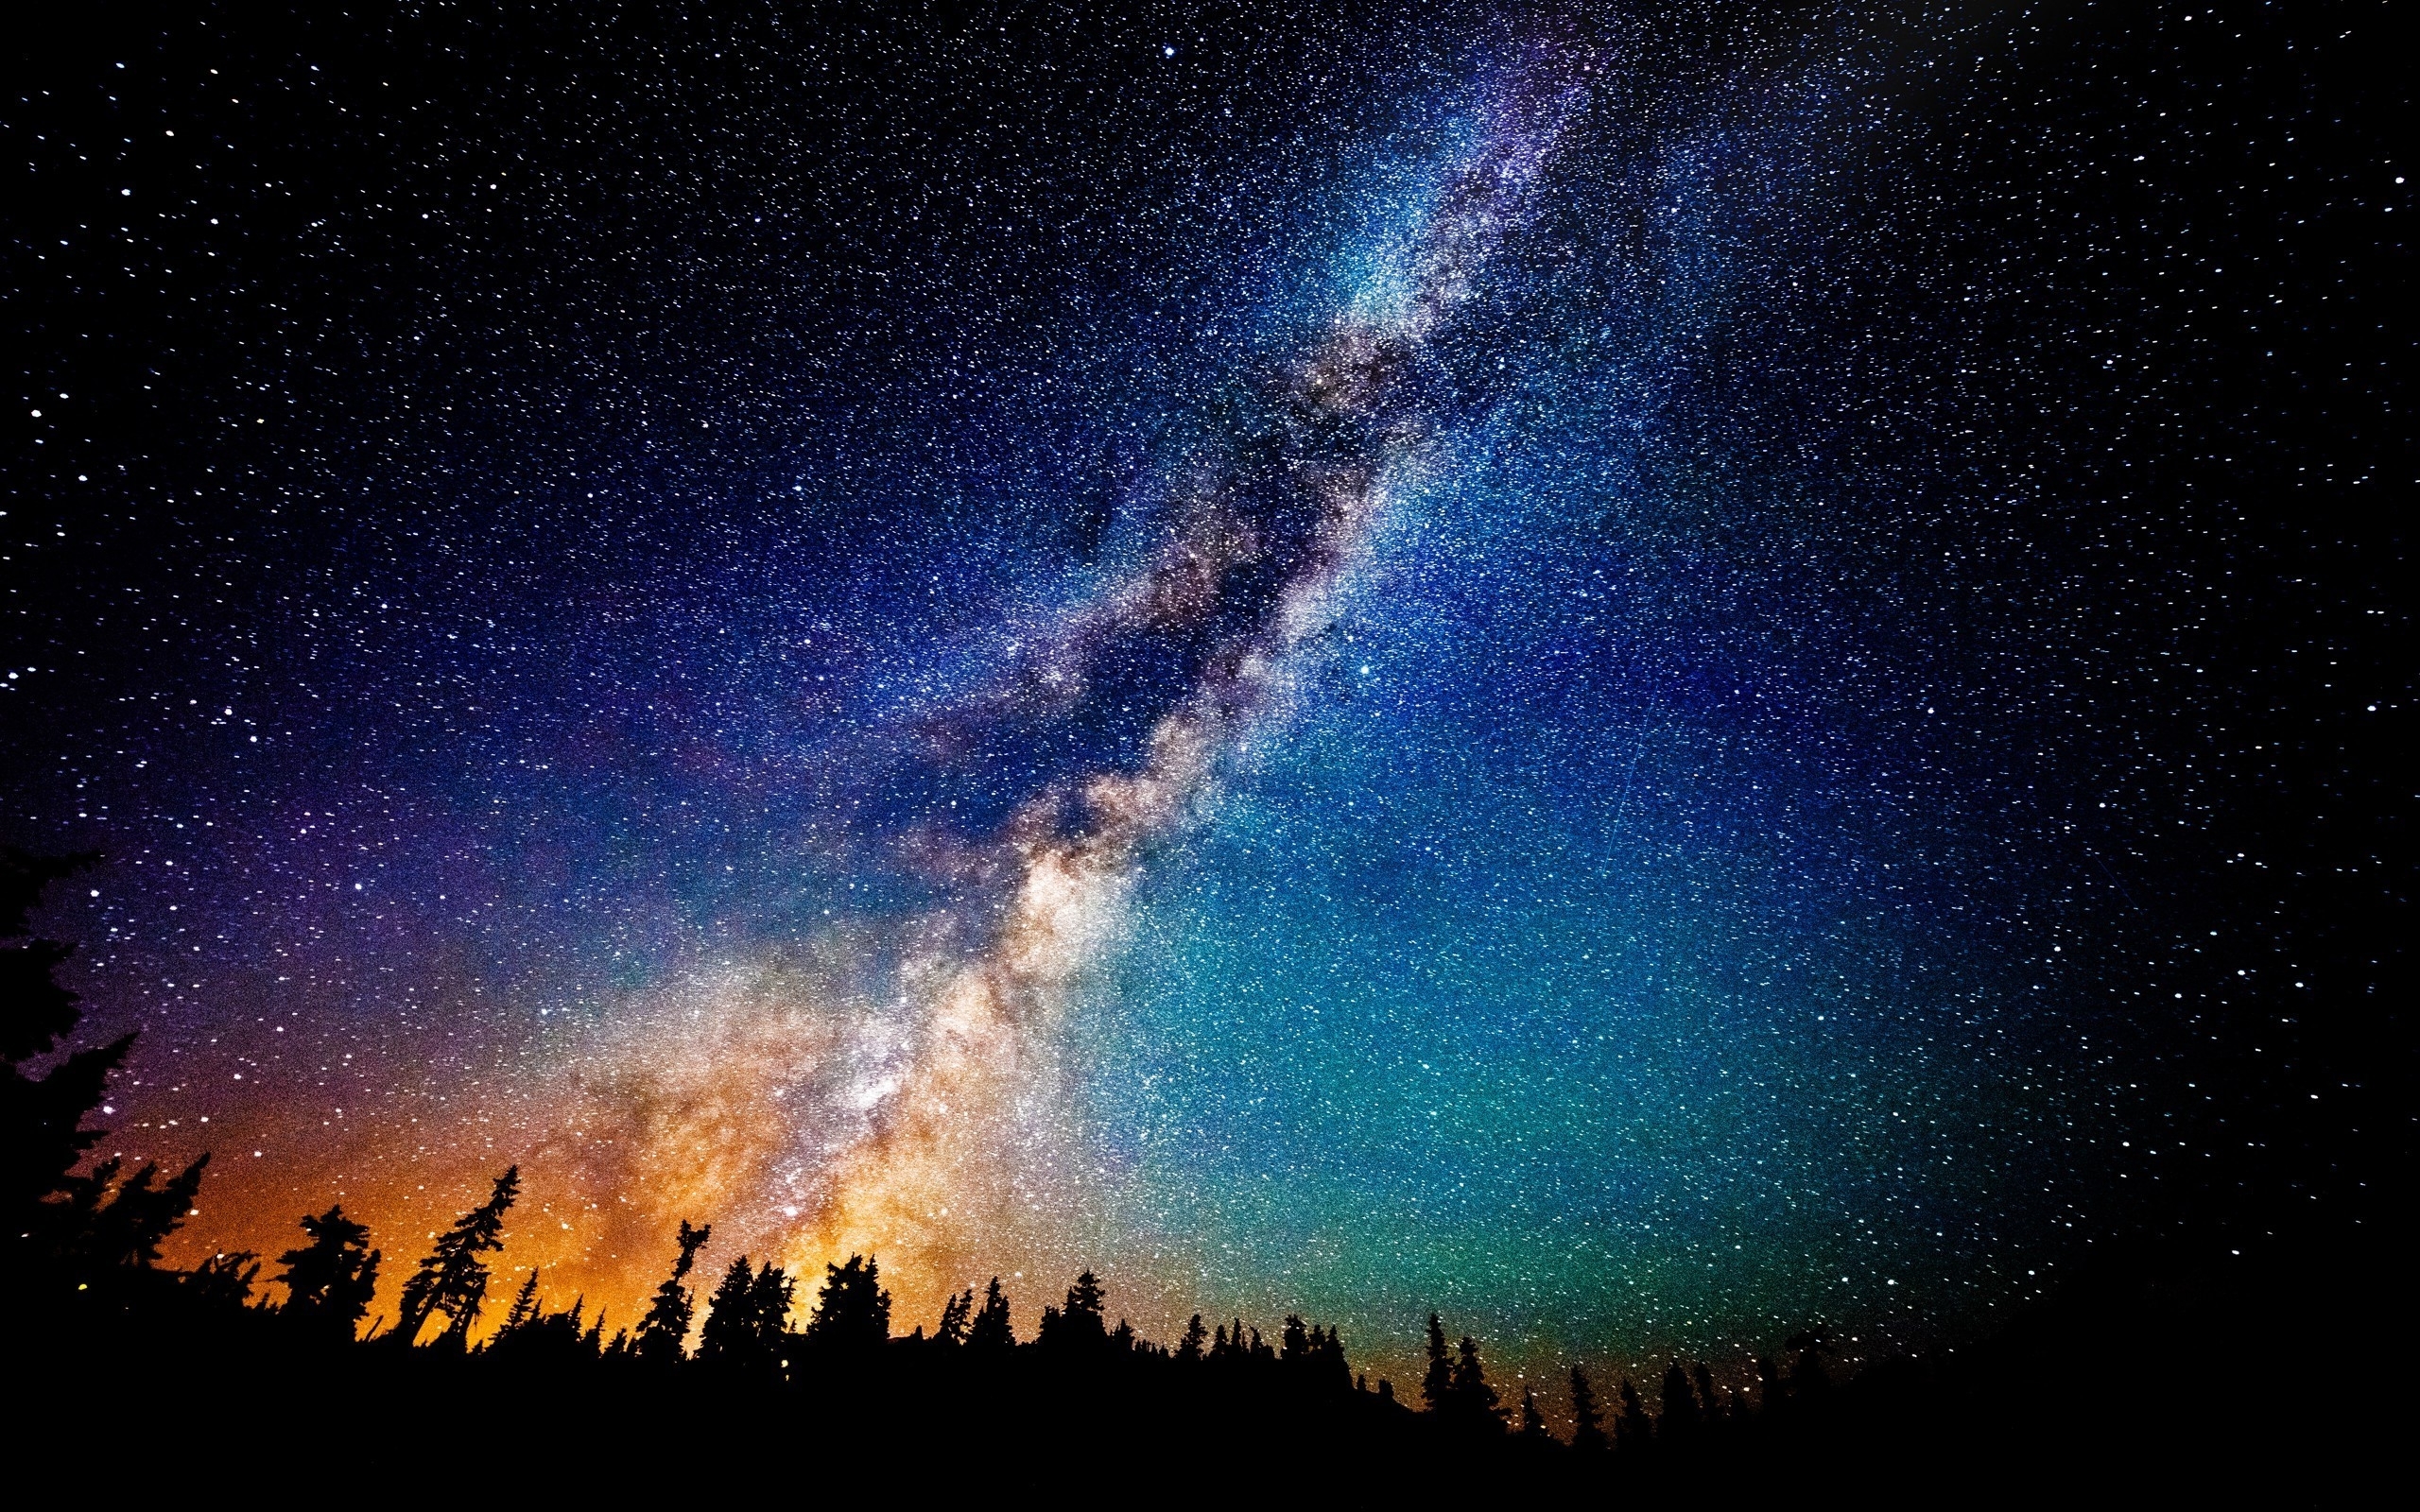 10 Best Milky Way Galaxy Wallpaper FULL HD 1080p For PC Background